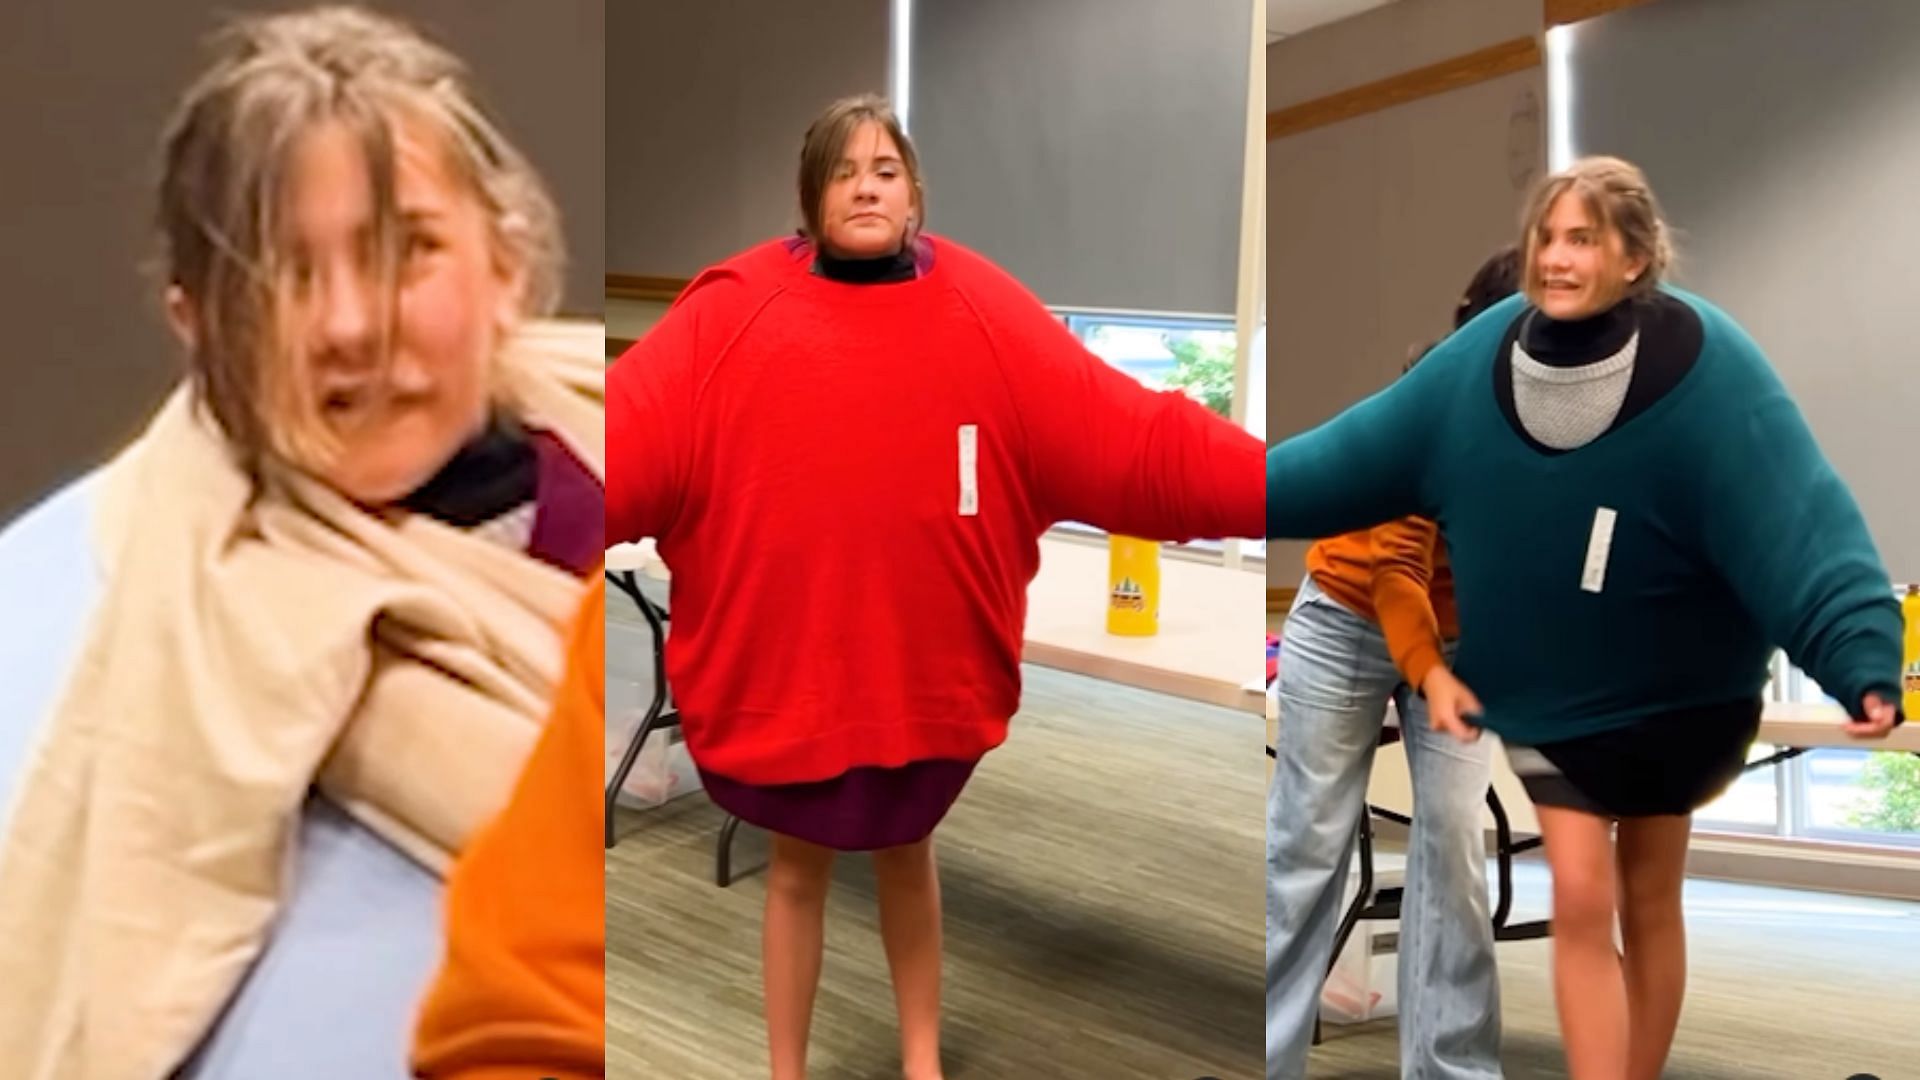 Most sweaters worn at once 45 by Sophia F Hayden USA schoolgirl breaks world record